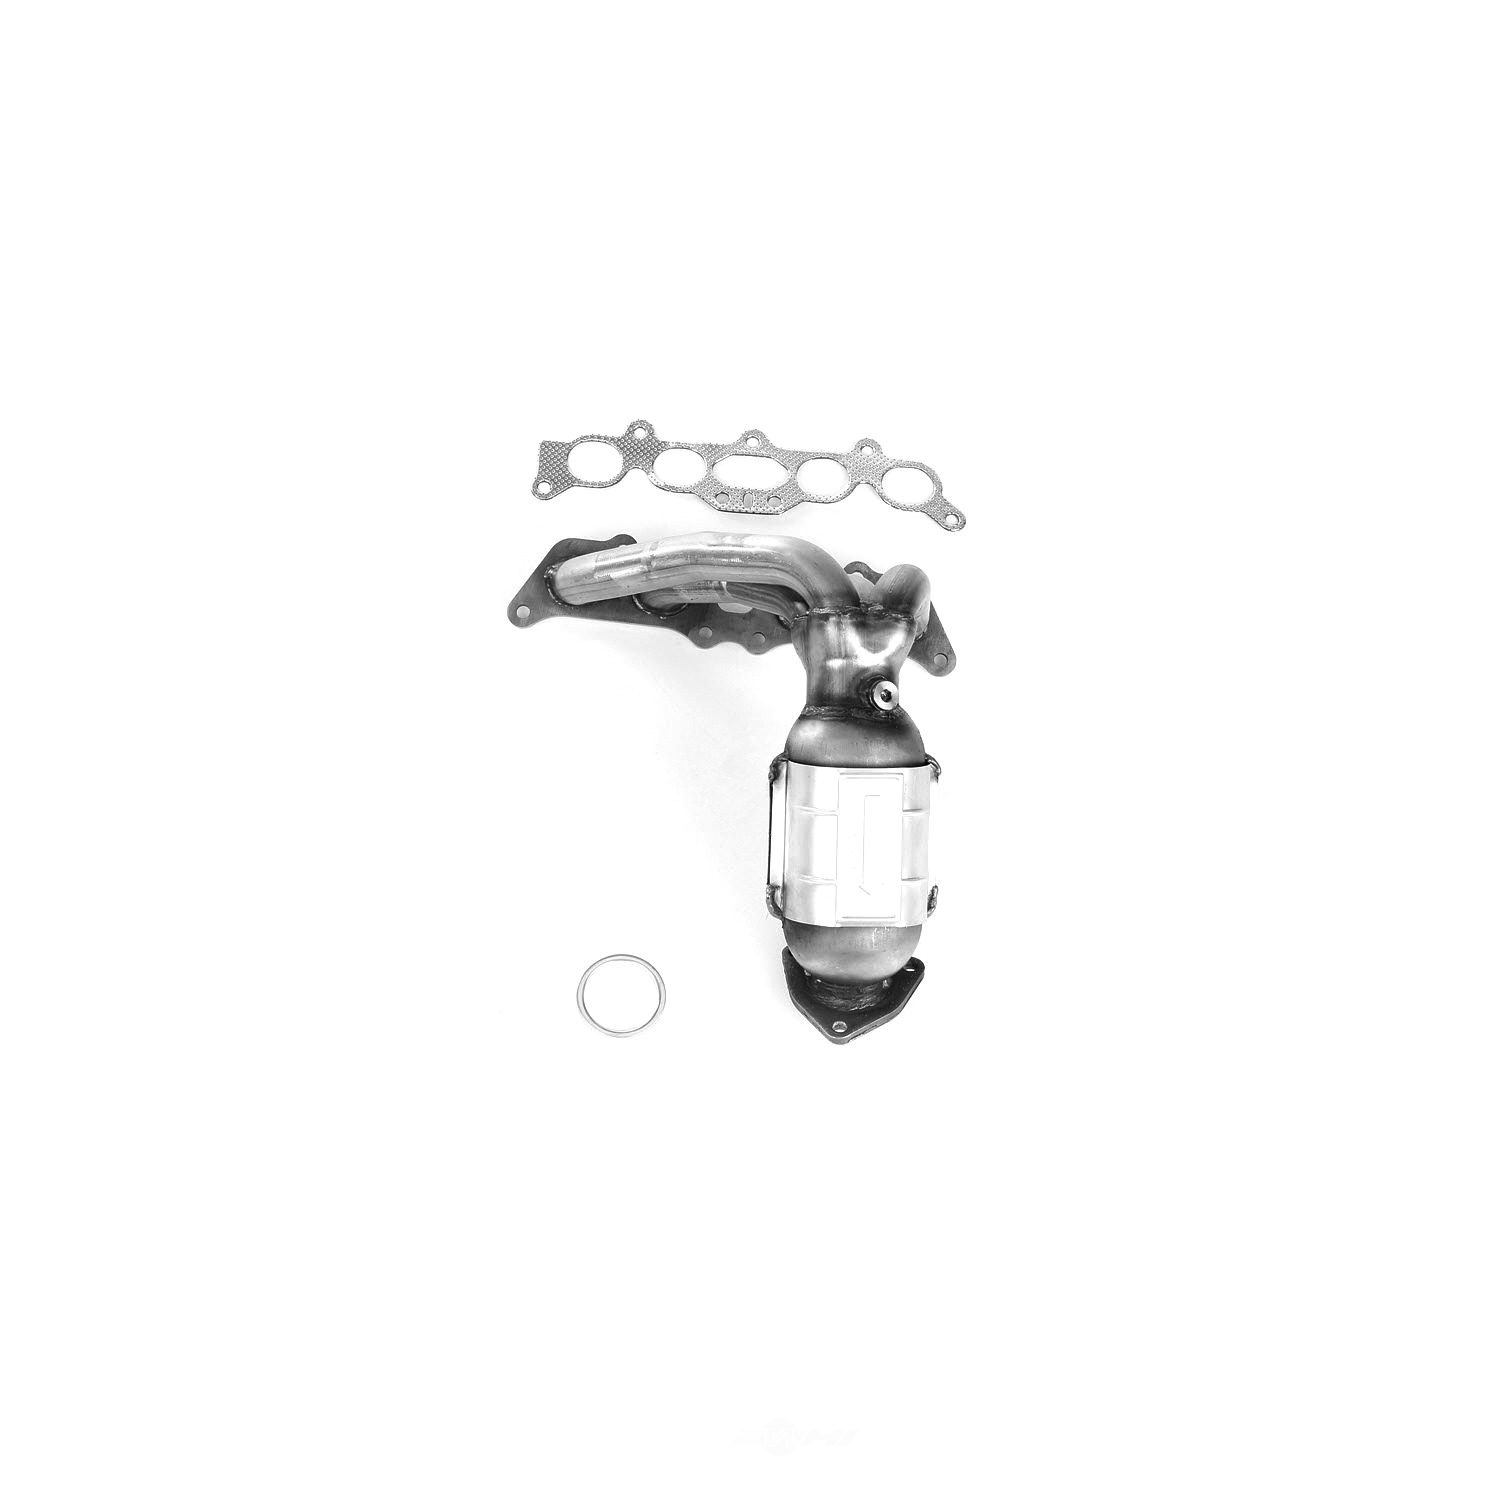 AP EXHAUST W/FEDERAL CONVERTER - Catalytic Converter with Integrated Exhaust Manifold - APF 641132